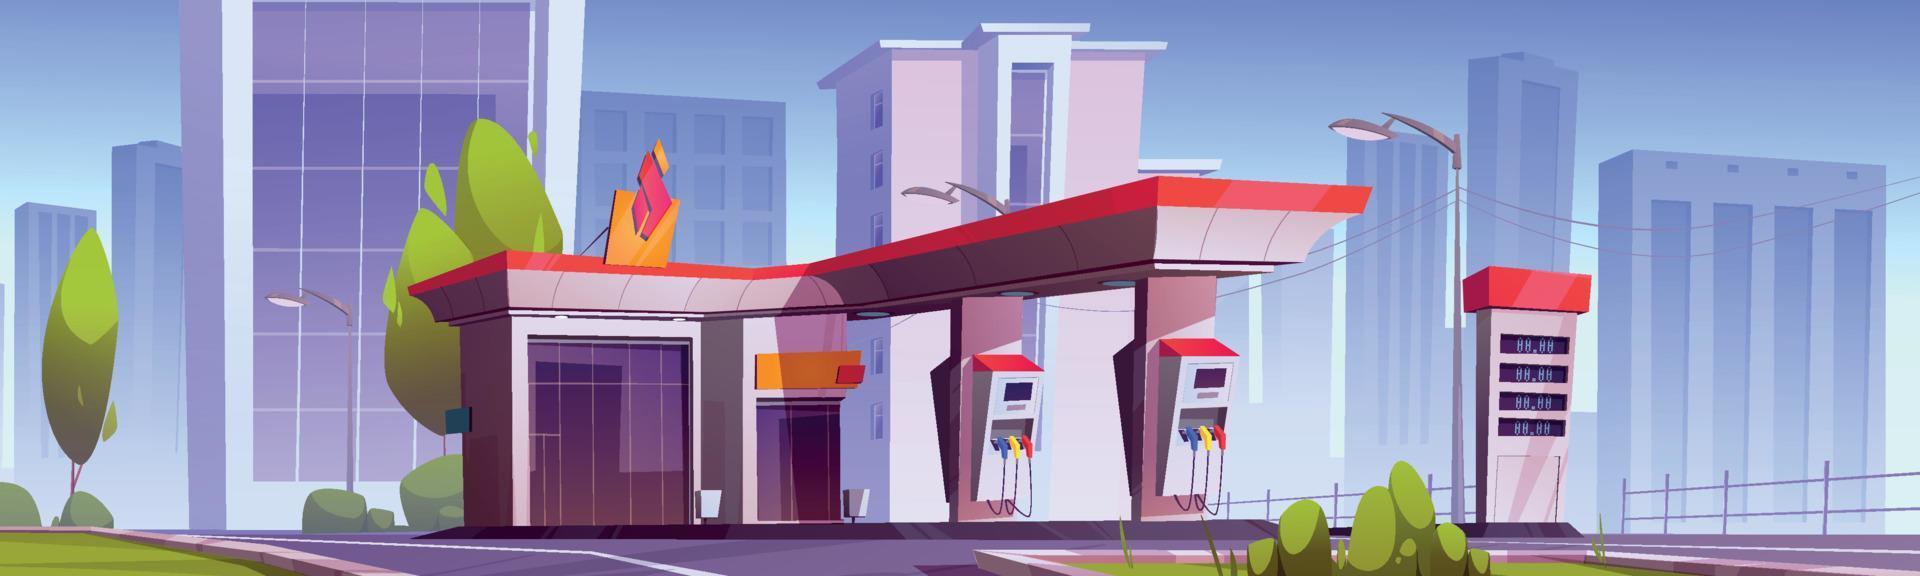 Gas station with oil pump and market in city vector